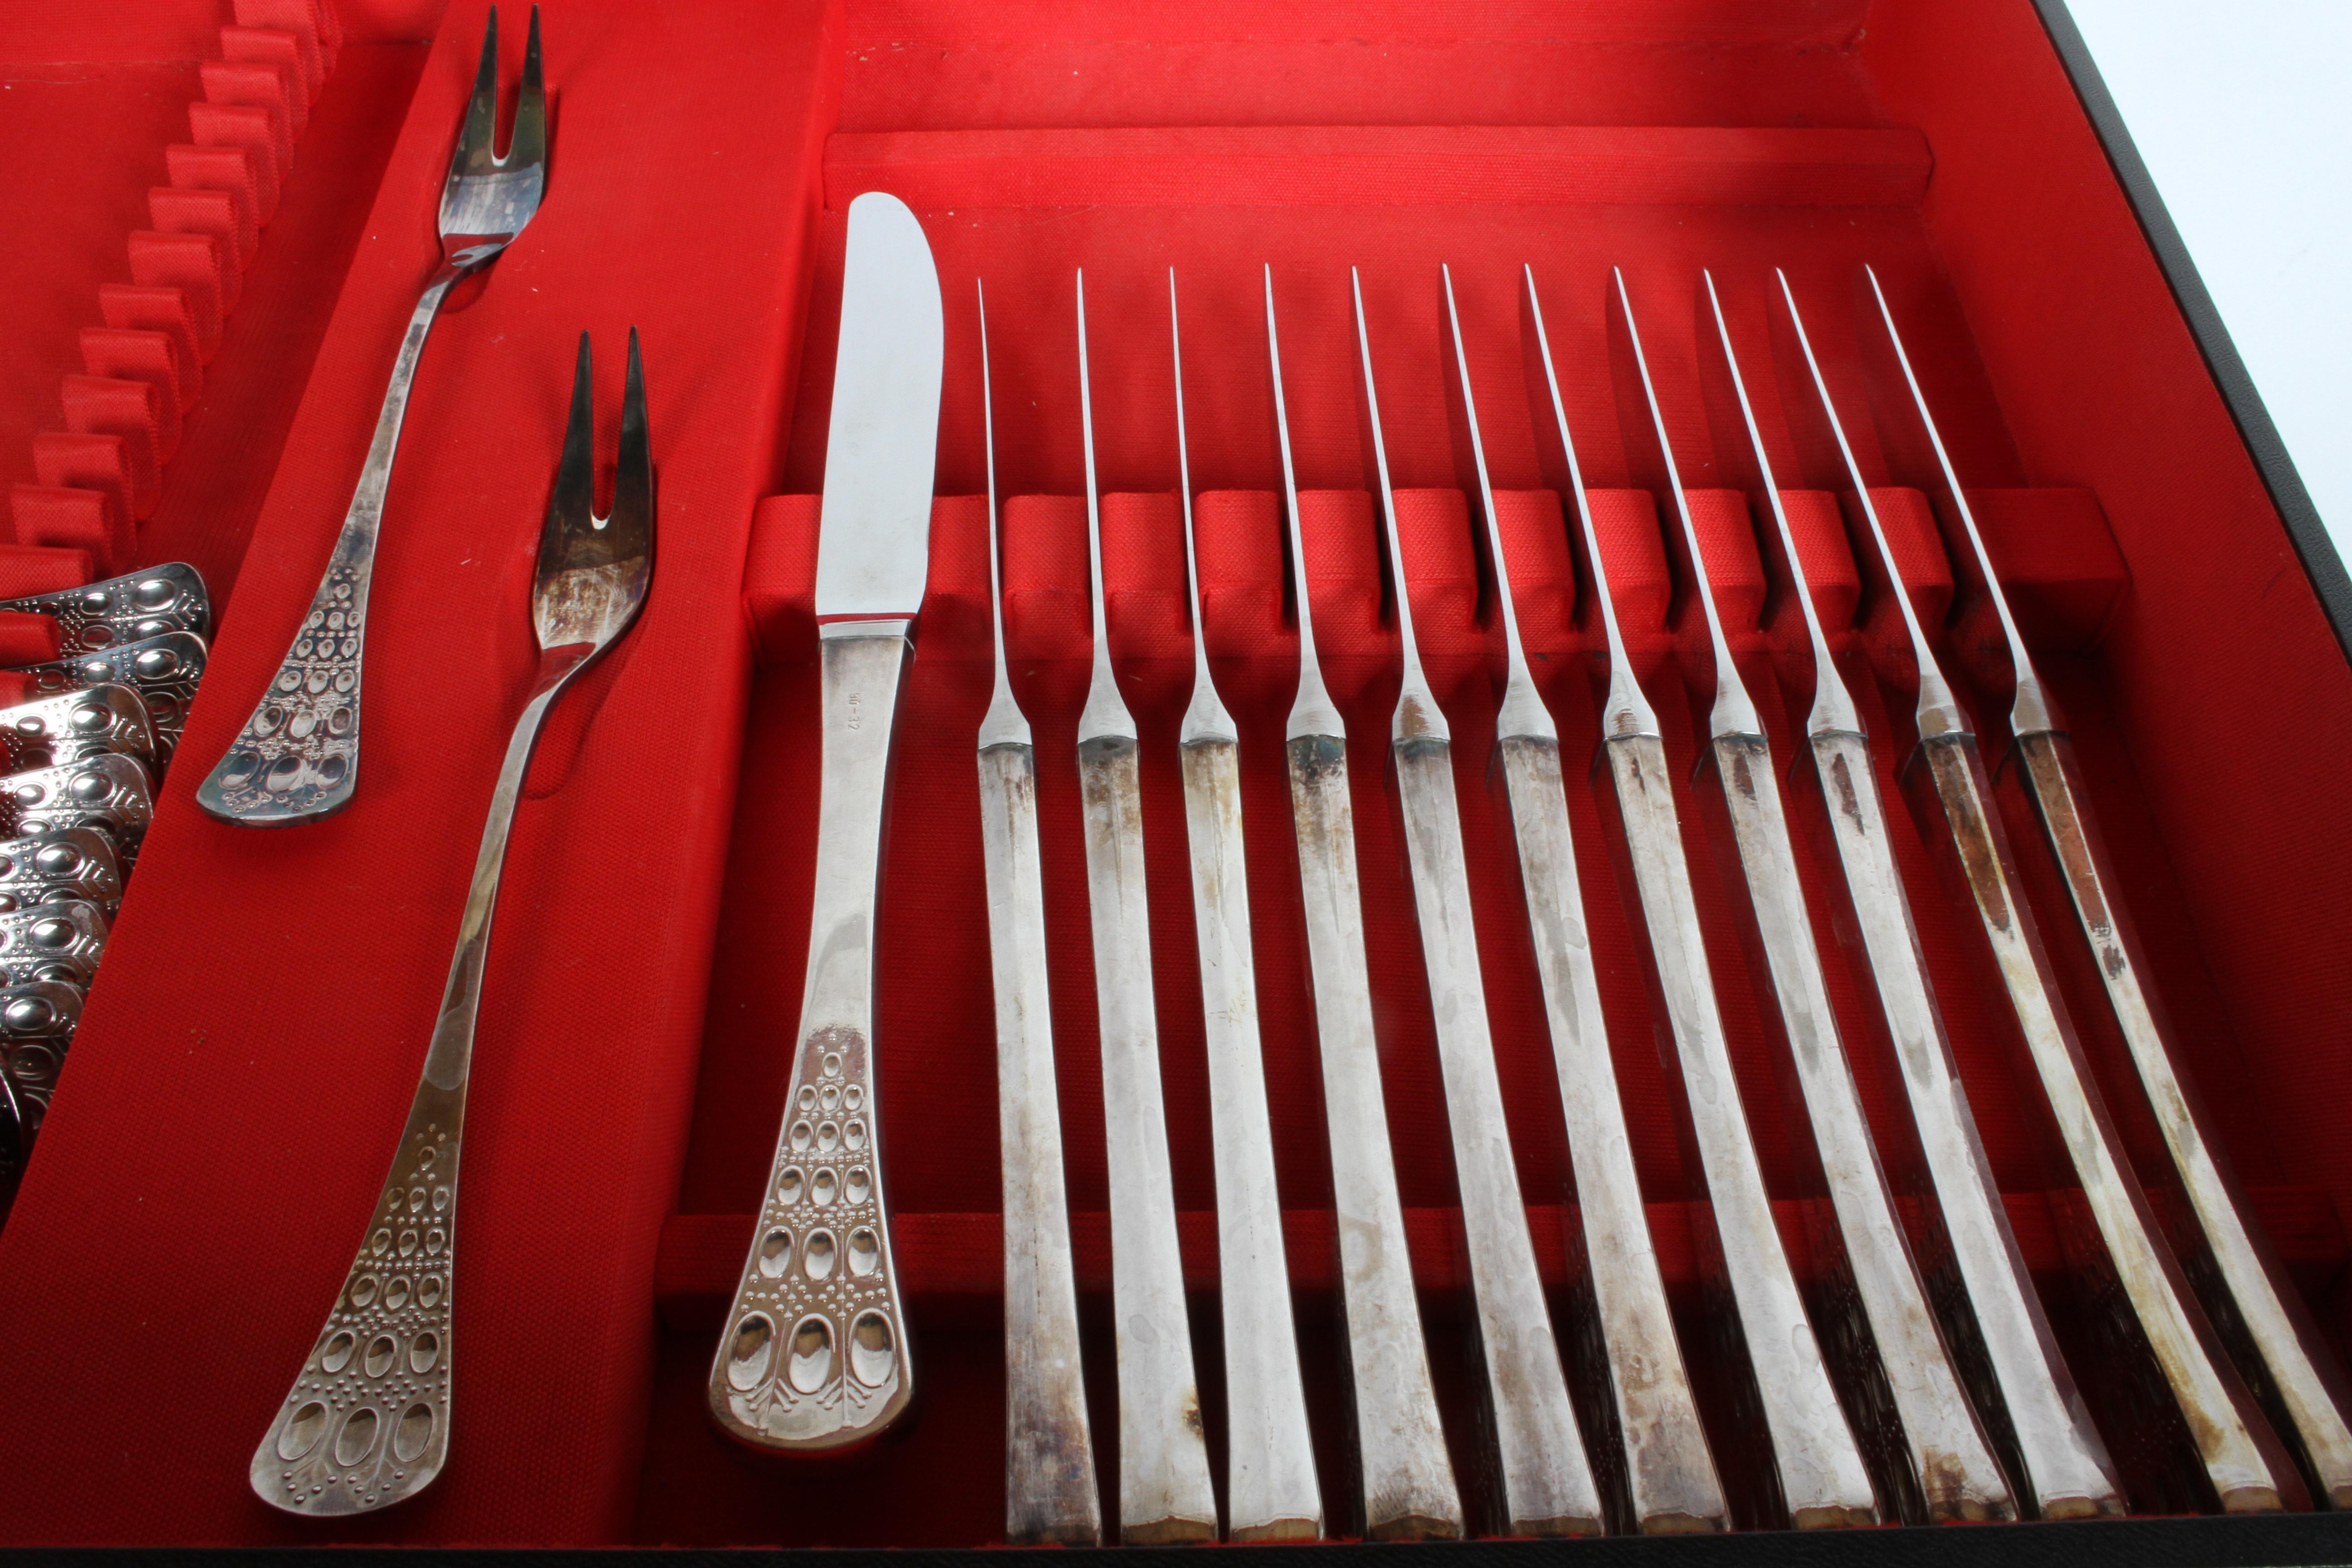 Romance, Bijorn Windblad Rosenthal Silverplate Flatware for 12 with Case 79 Pcs For Sale 8